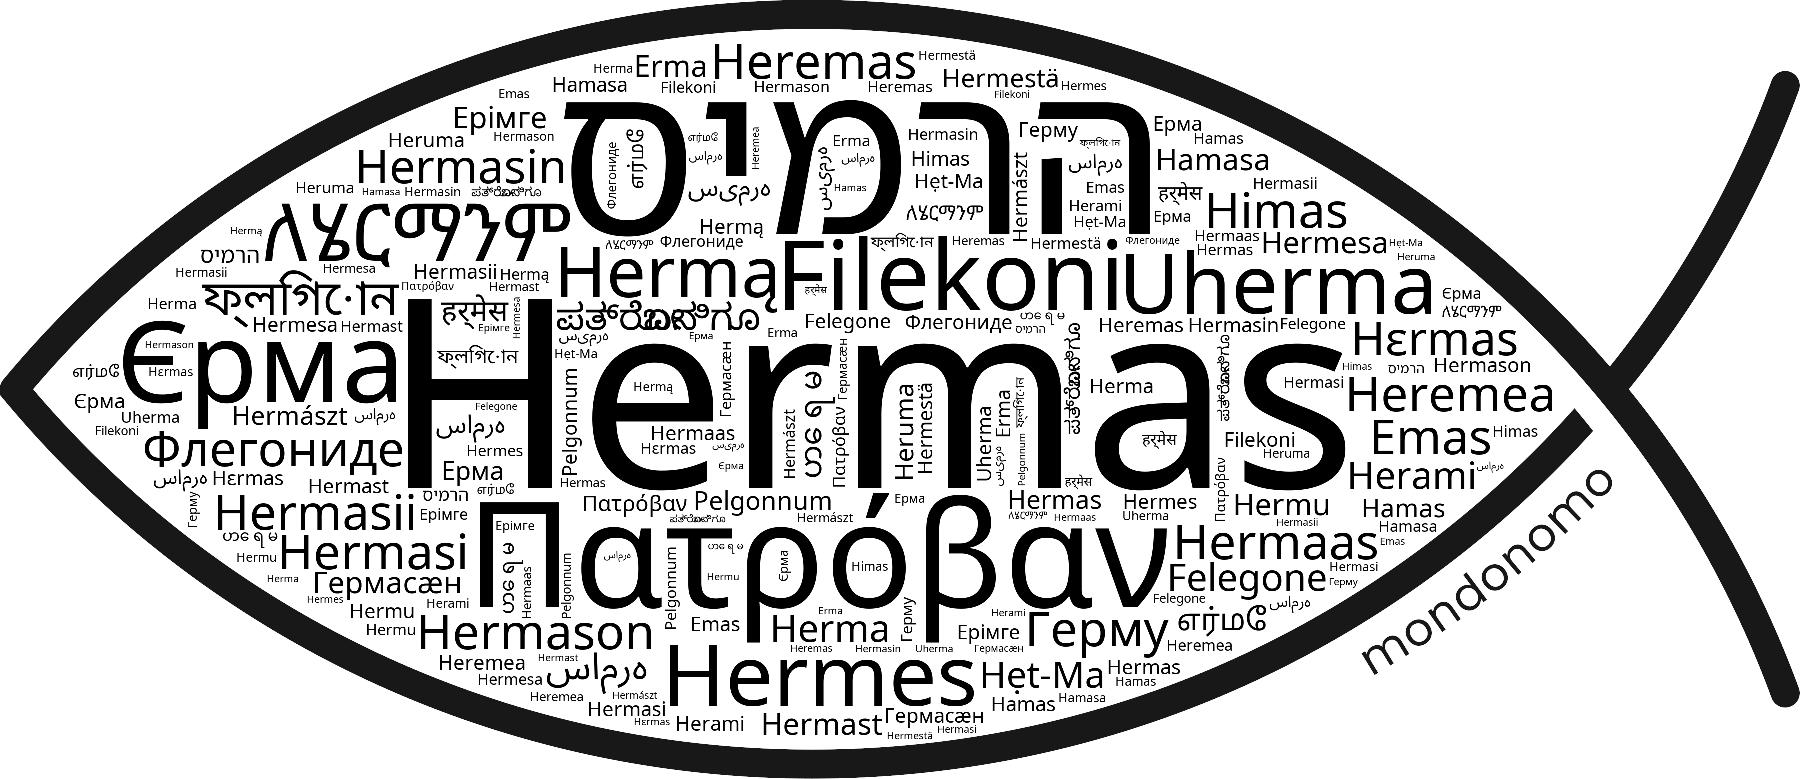 Name Hermas in the world's Bibles